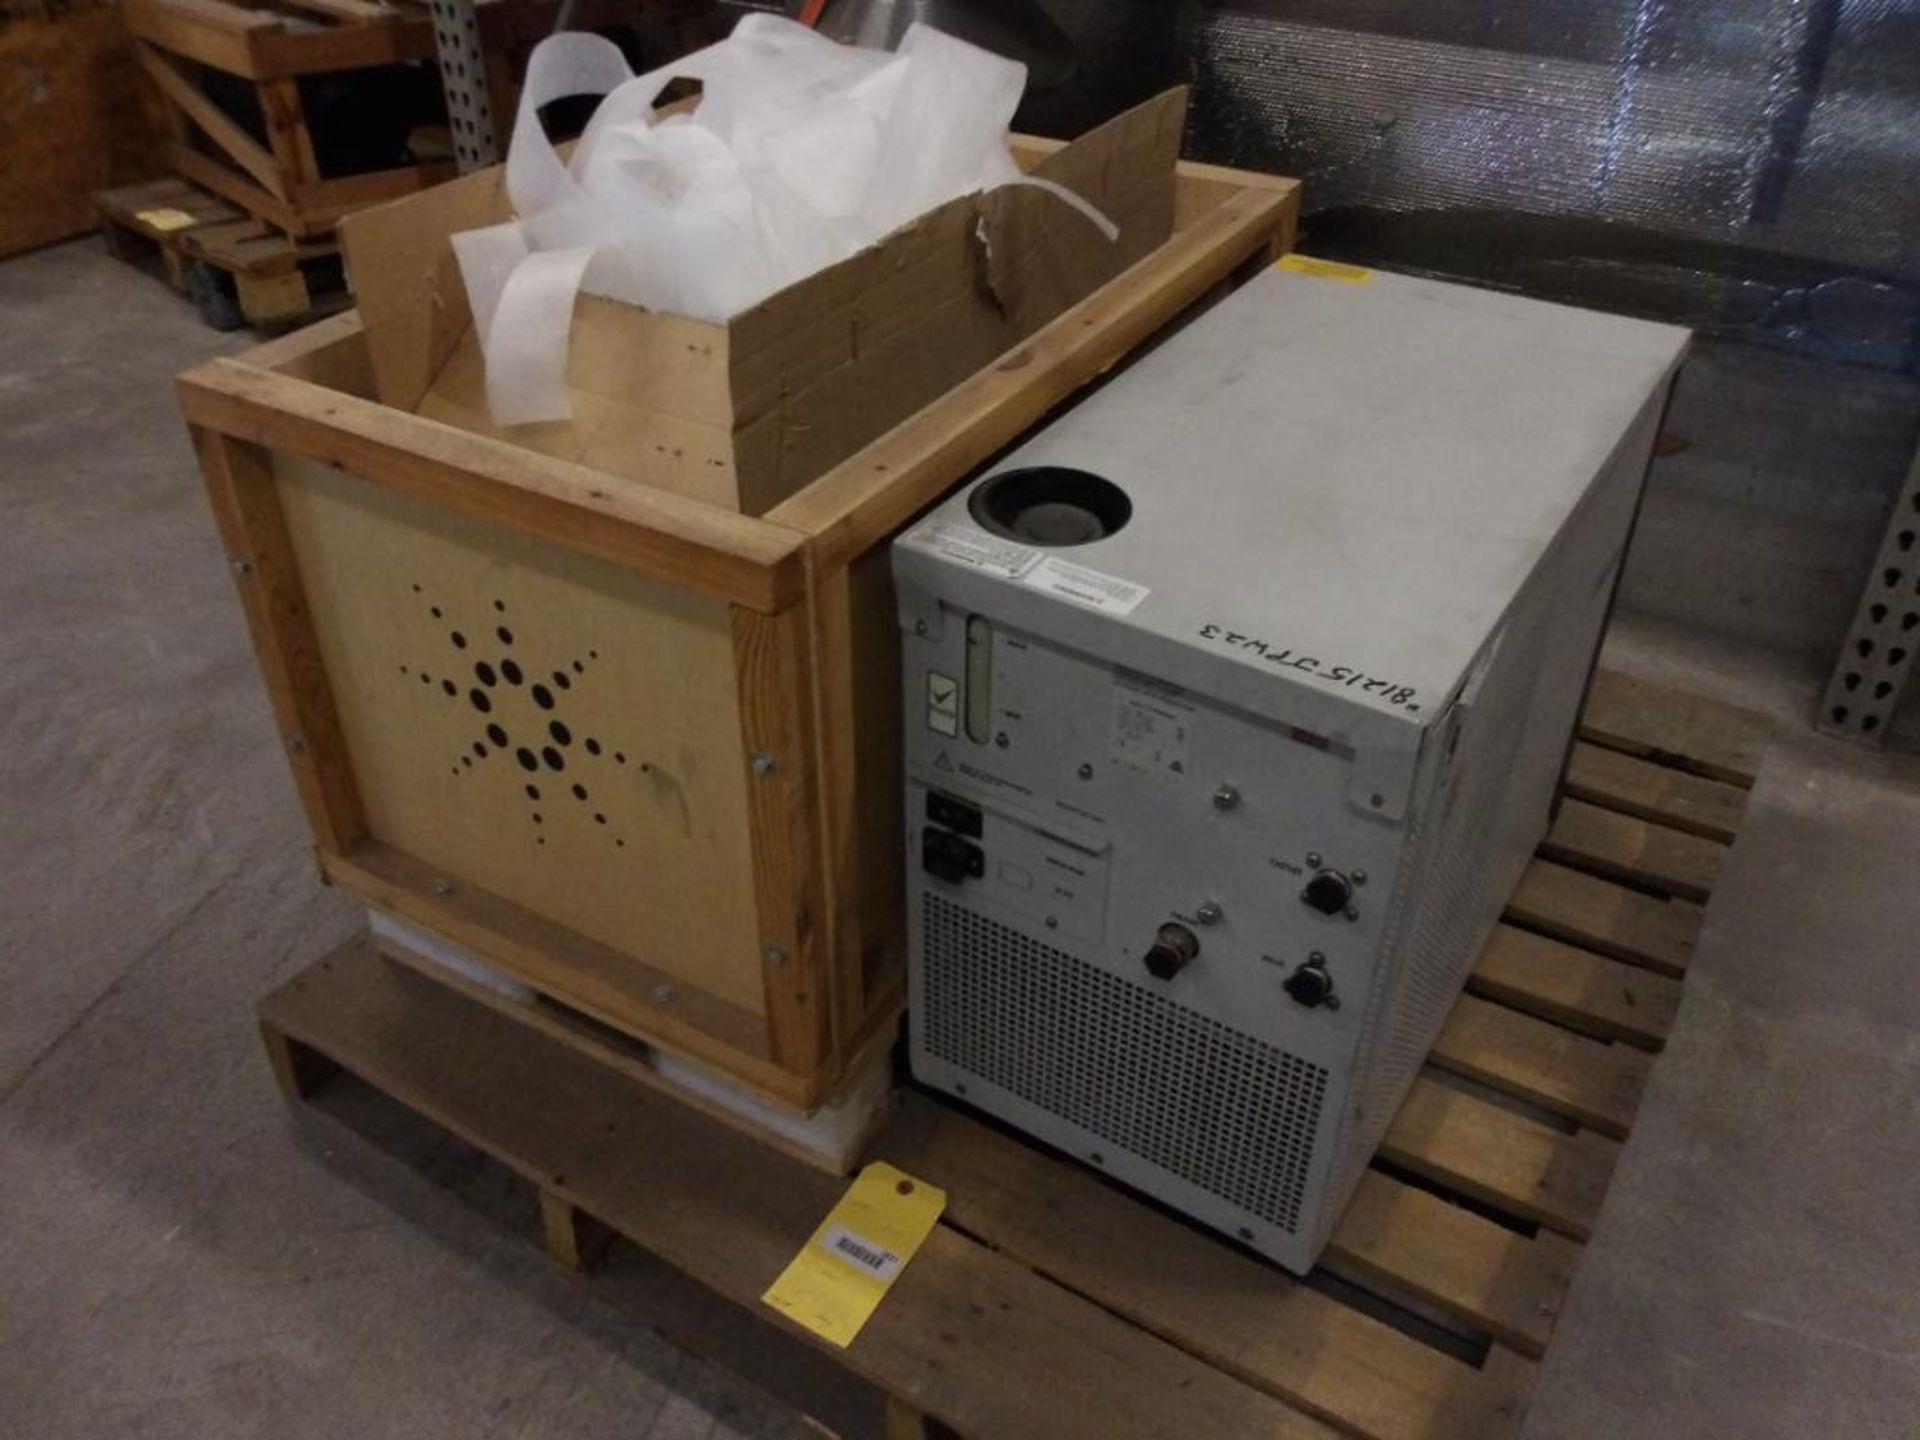 Agilent Assy. Mono Cary 600I Spare, Agilent G3292A Water Chiller (New)